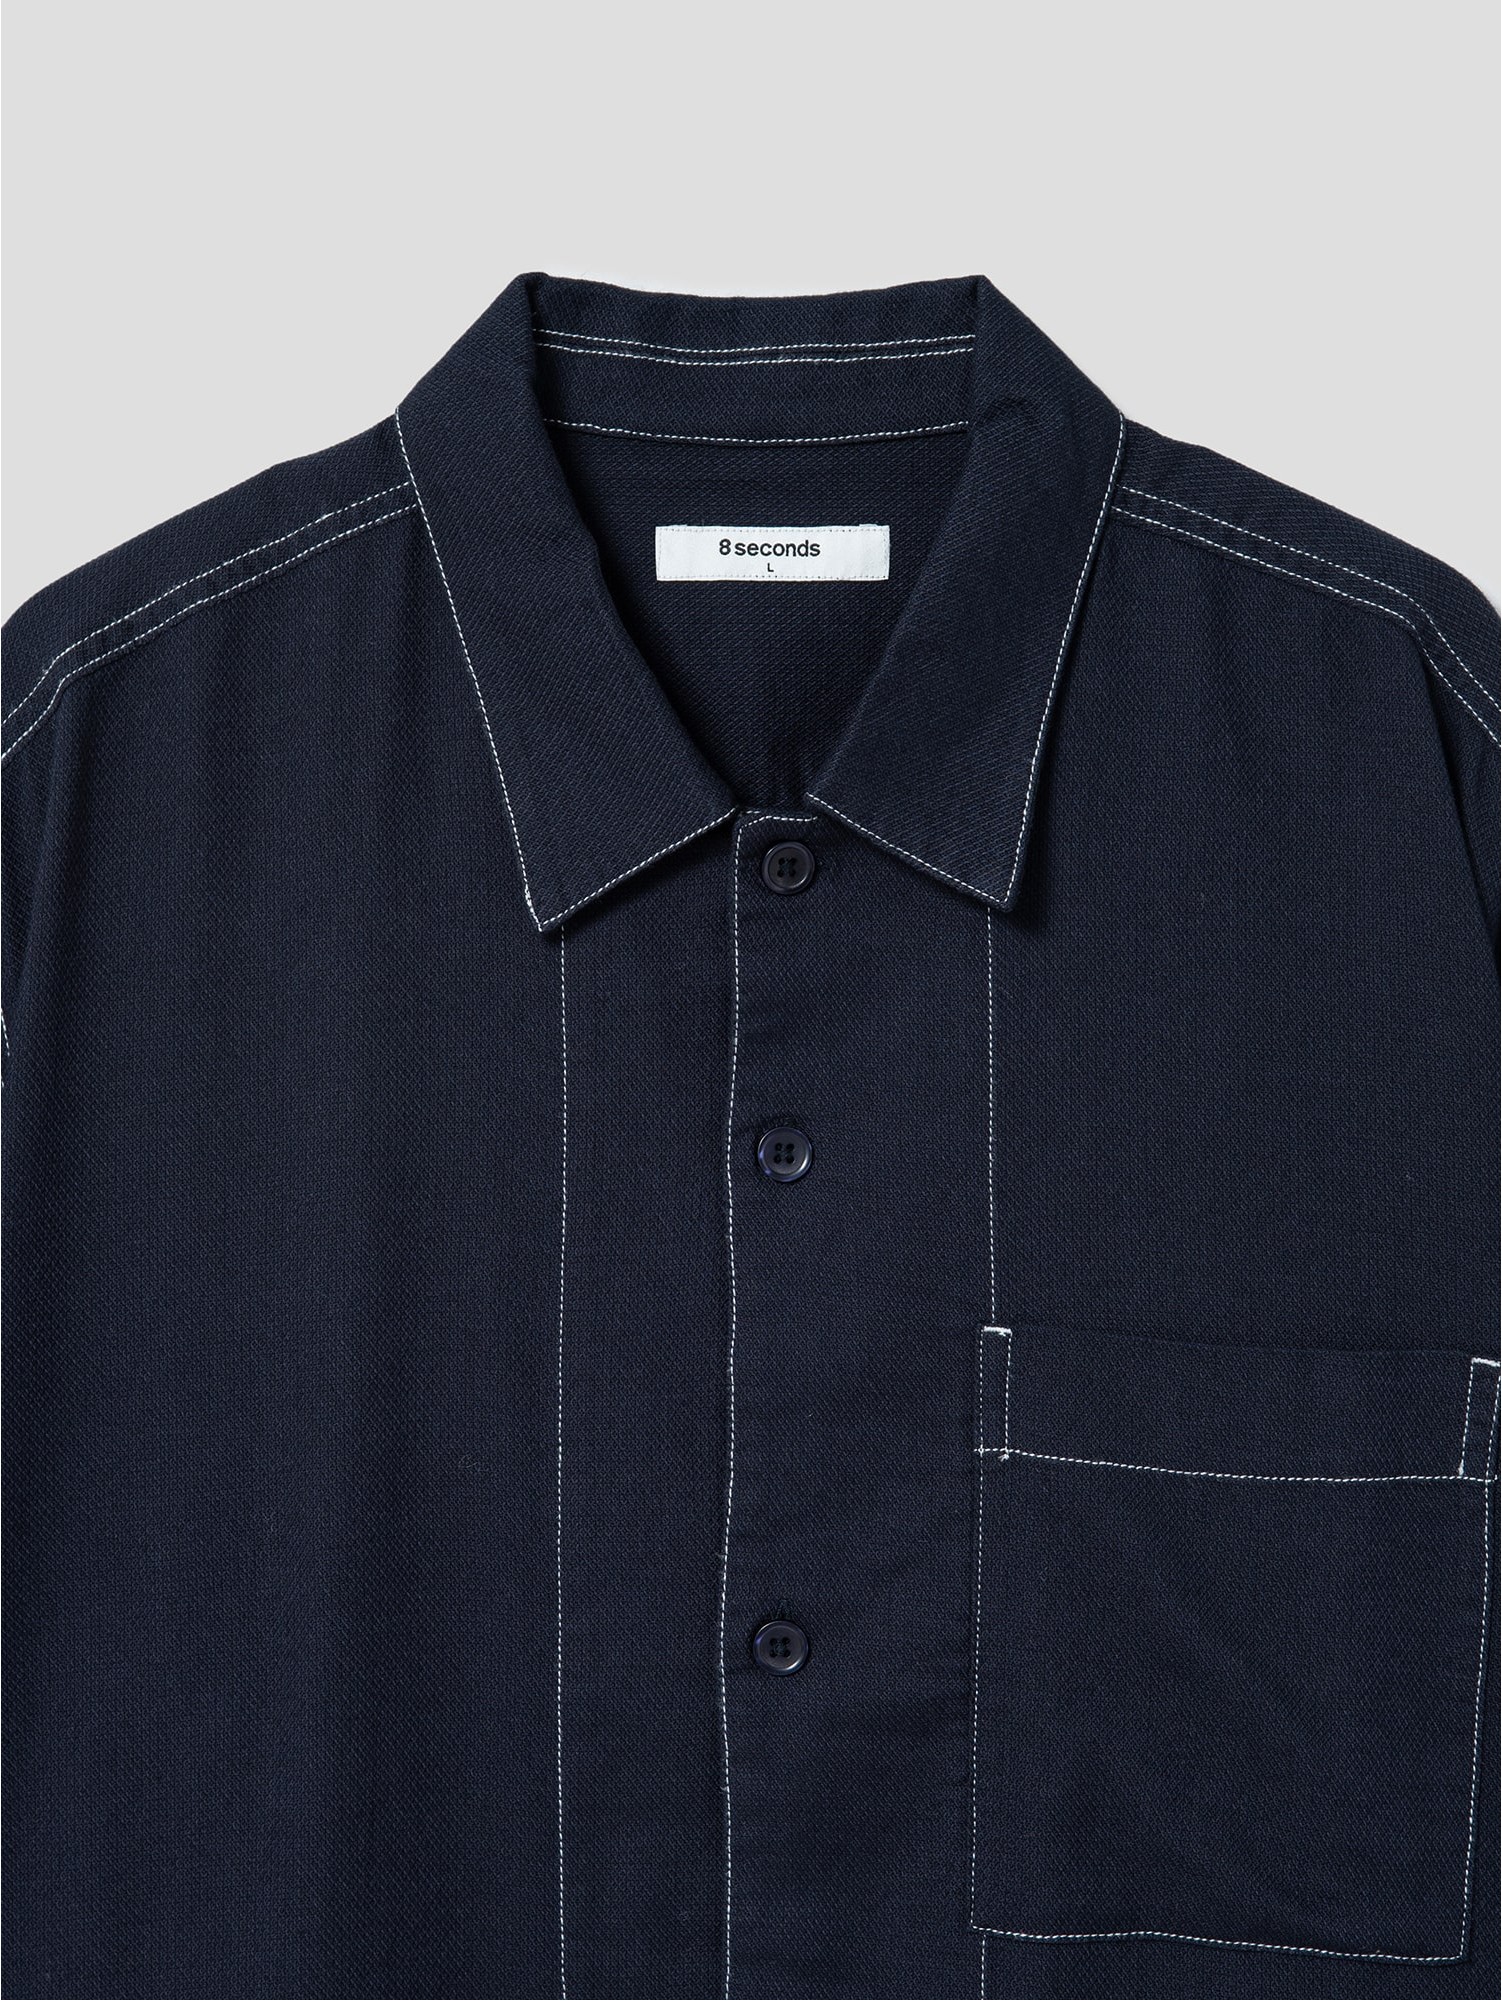 8seconds Net Oversized Half Sleeve Shirt Navy | Casual Shirts for